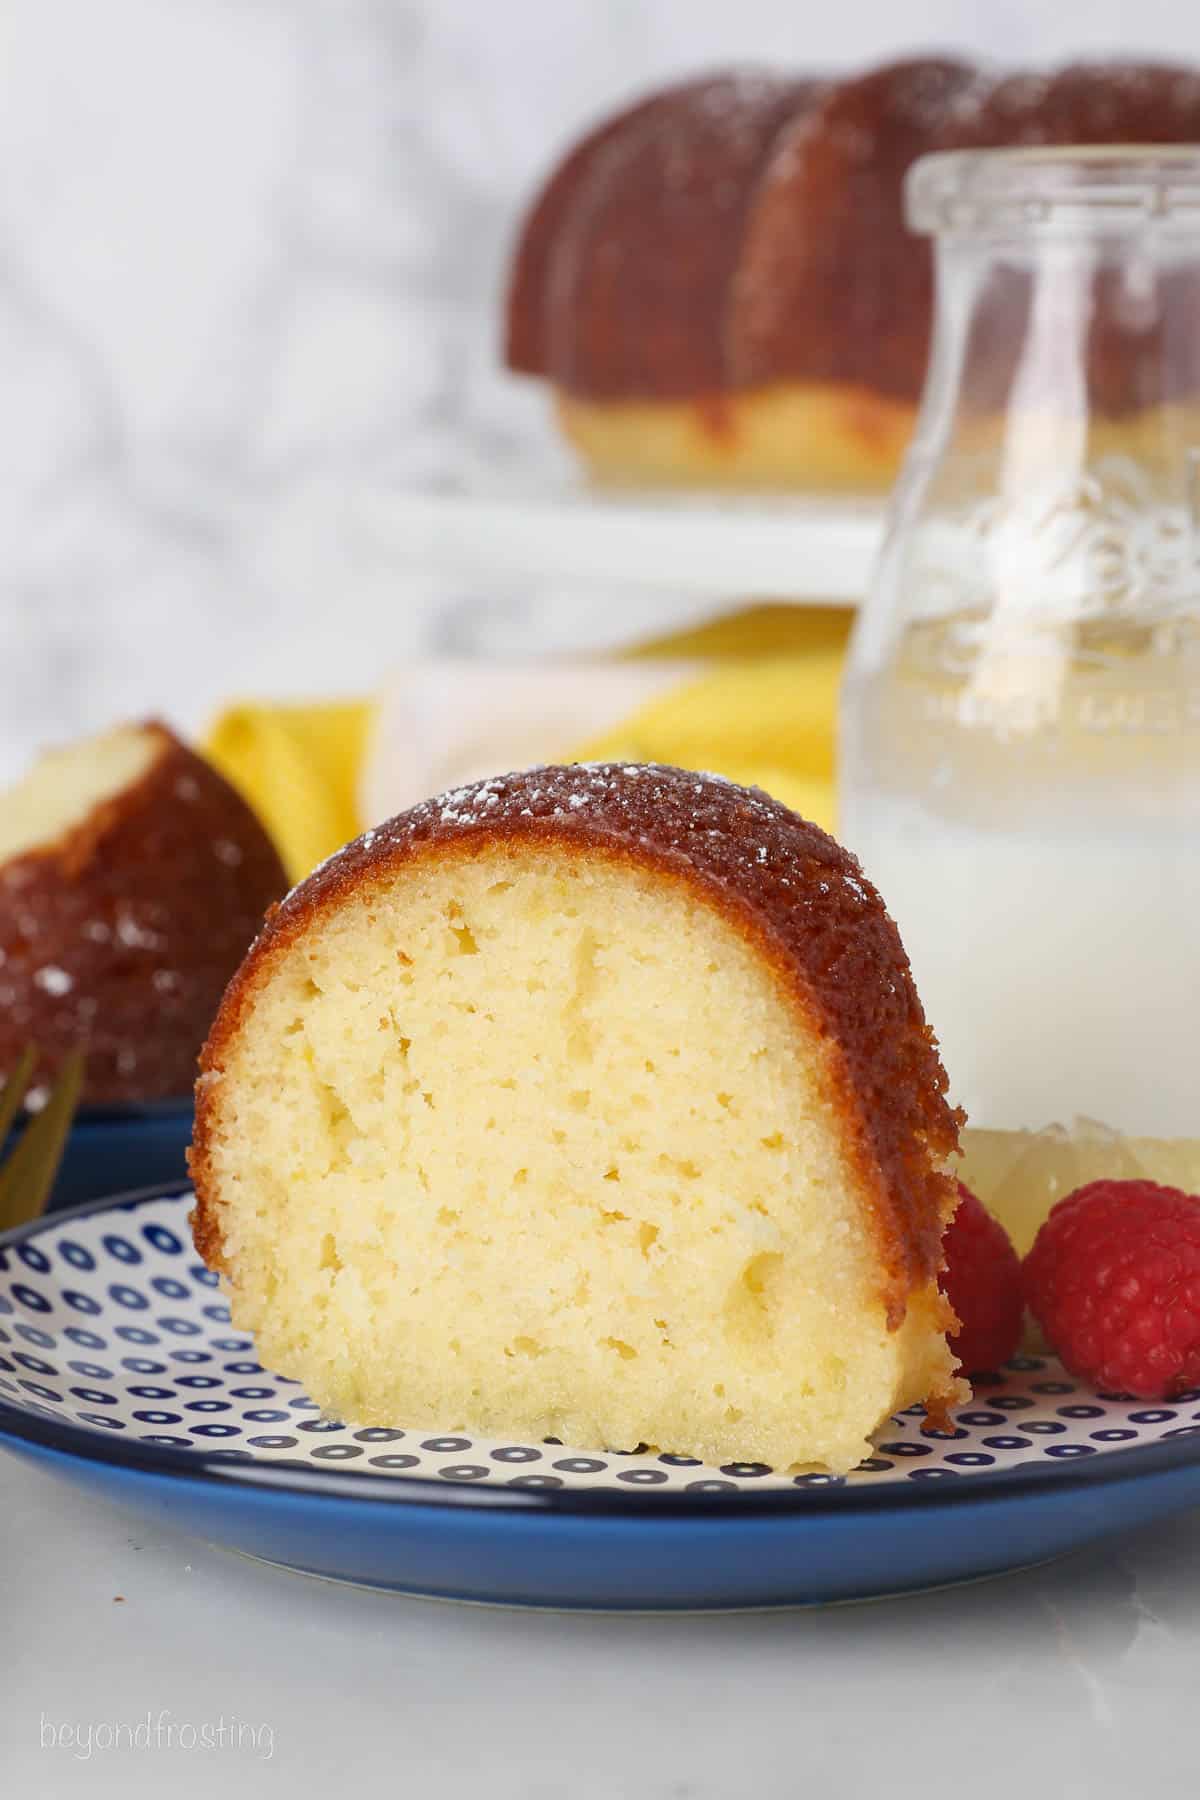 A slice of lemon drizzle cake on a plate next to fresh raspberries, with a jug of milk and a bundt cake on a cake stand in the background.